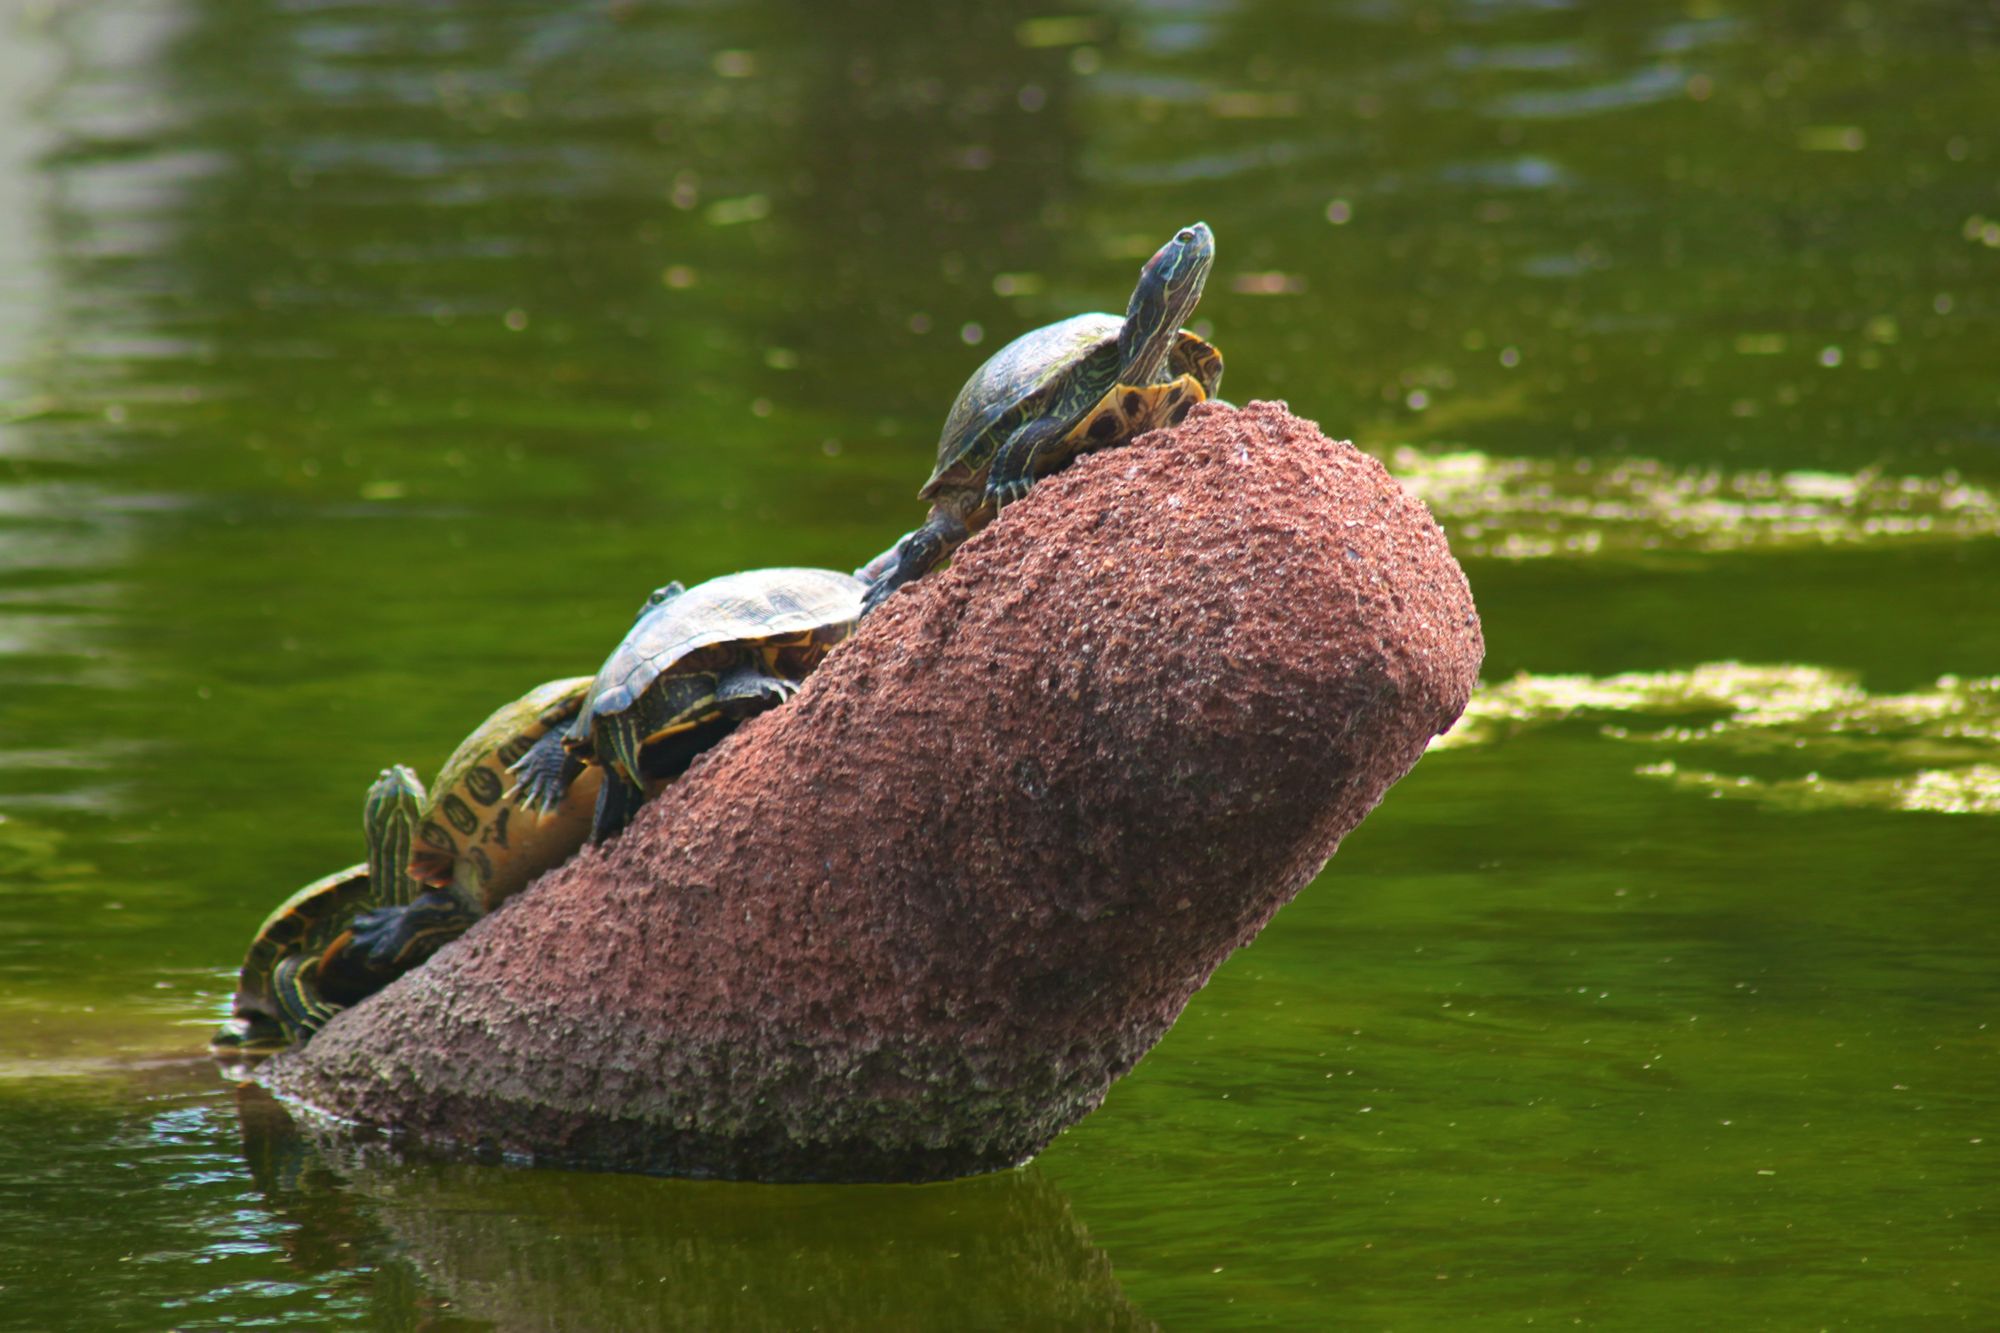 Turtles on a log at the Lower Wetland Cells